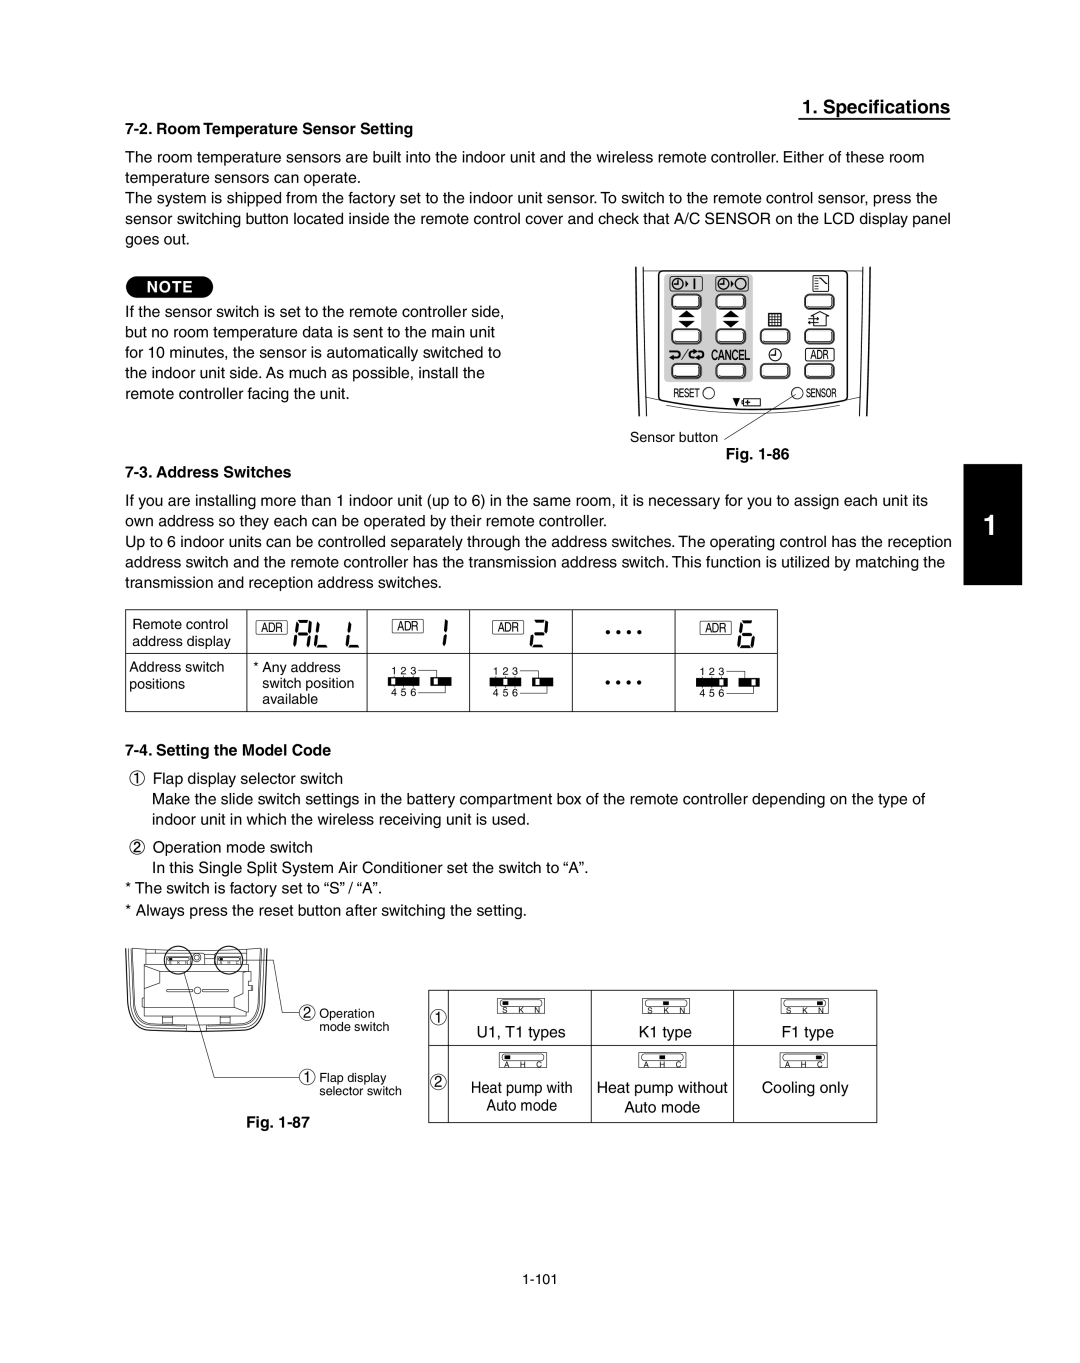 Panasonic R410A service manual Specifications, Room Temperature Sensor Setting, 3.Address Switches, Setting the Model Code 